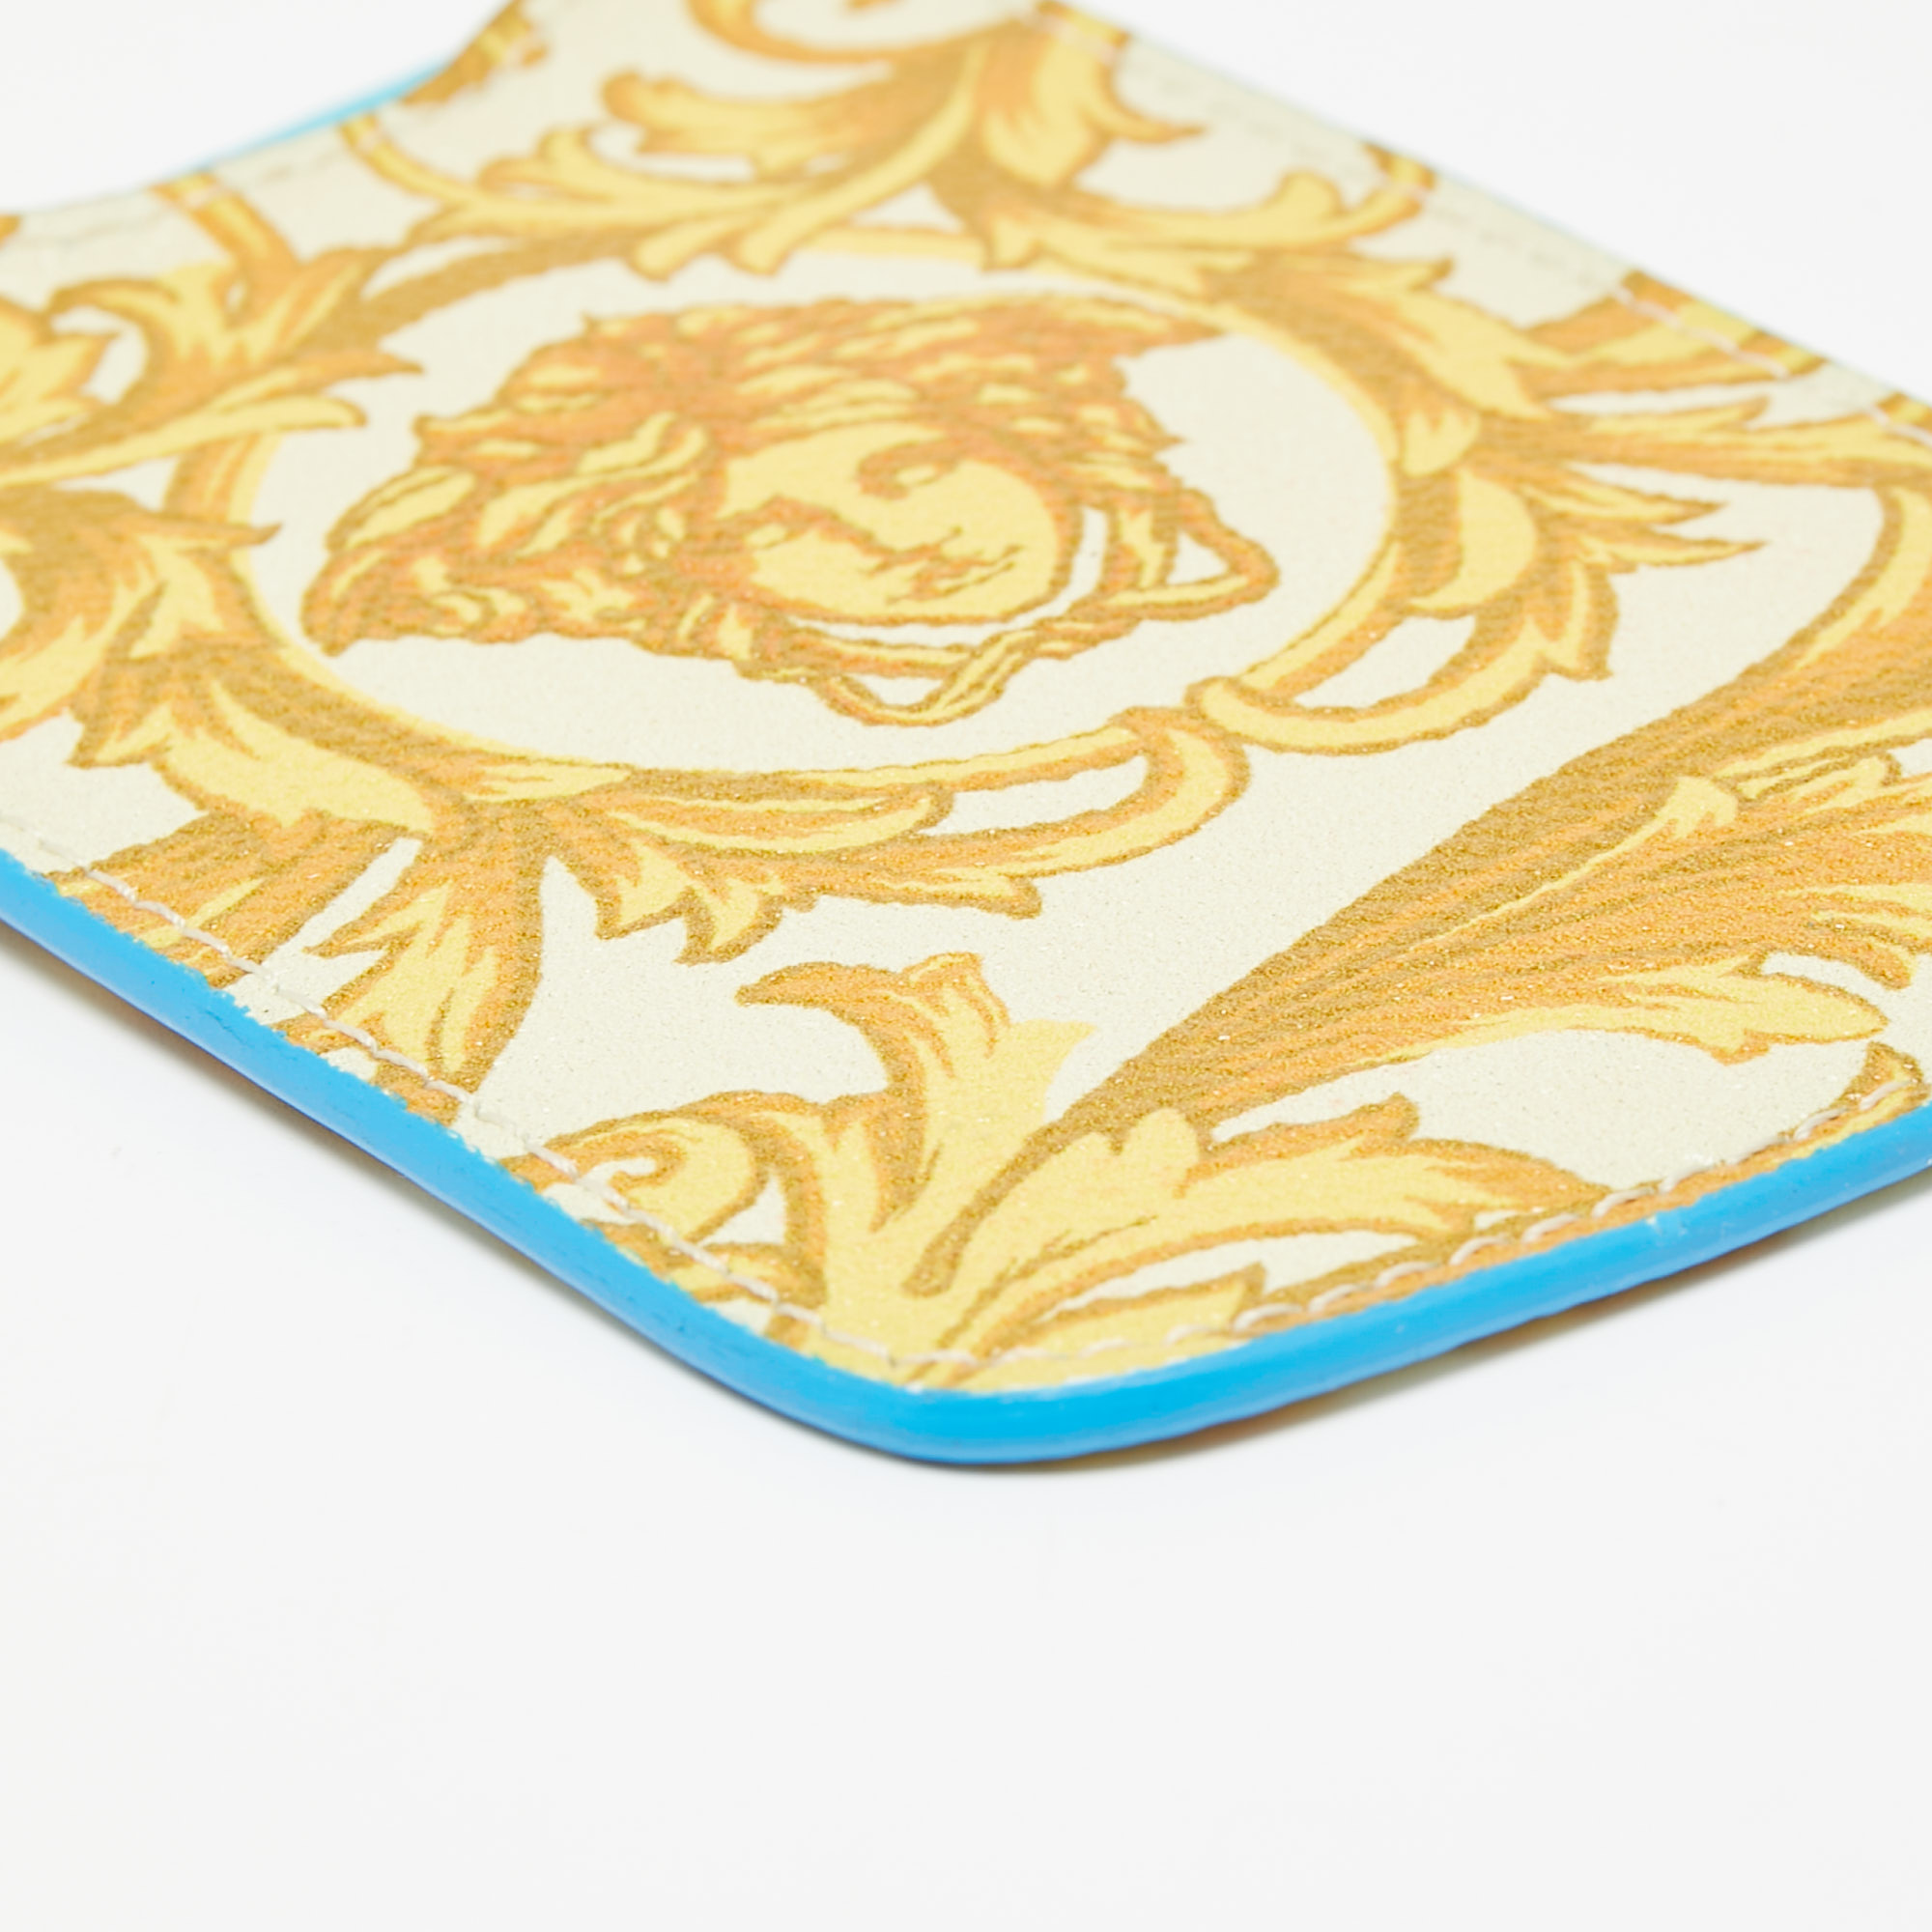 Versace Yellow/Blue Medusa Print Leather Phone Cover